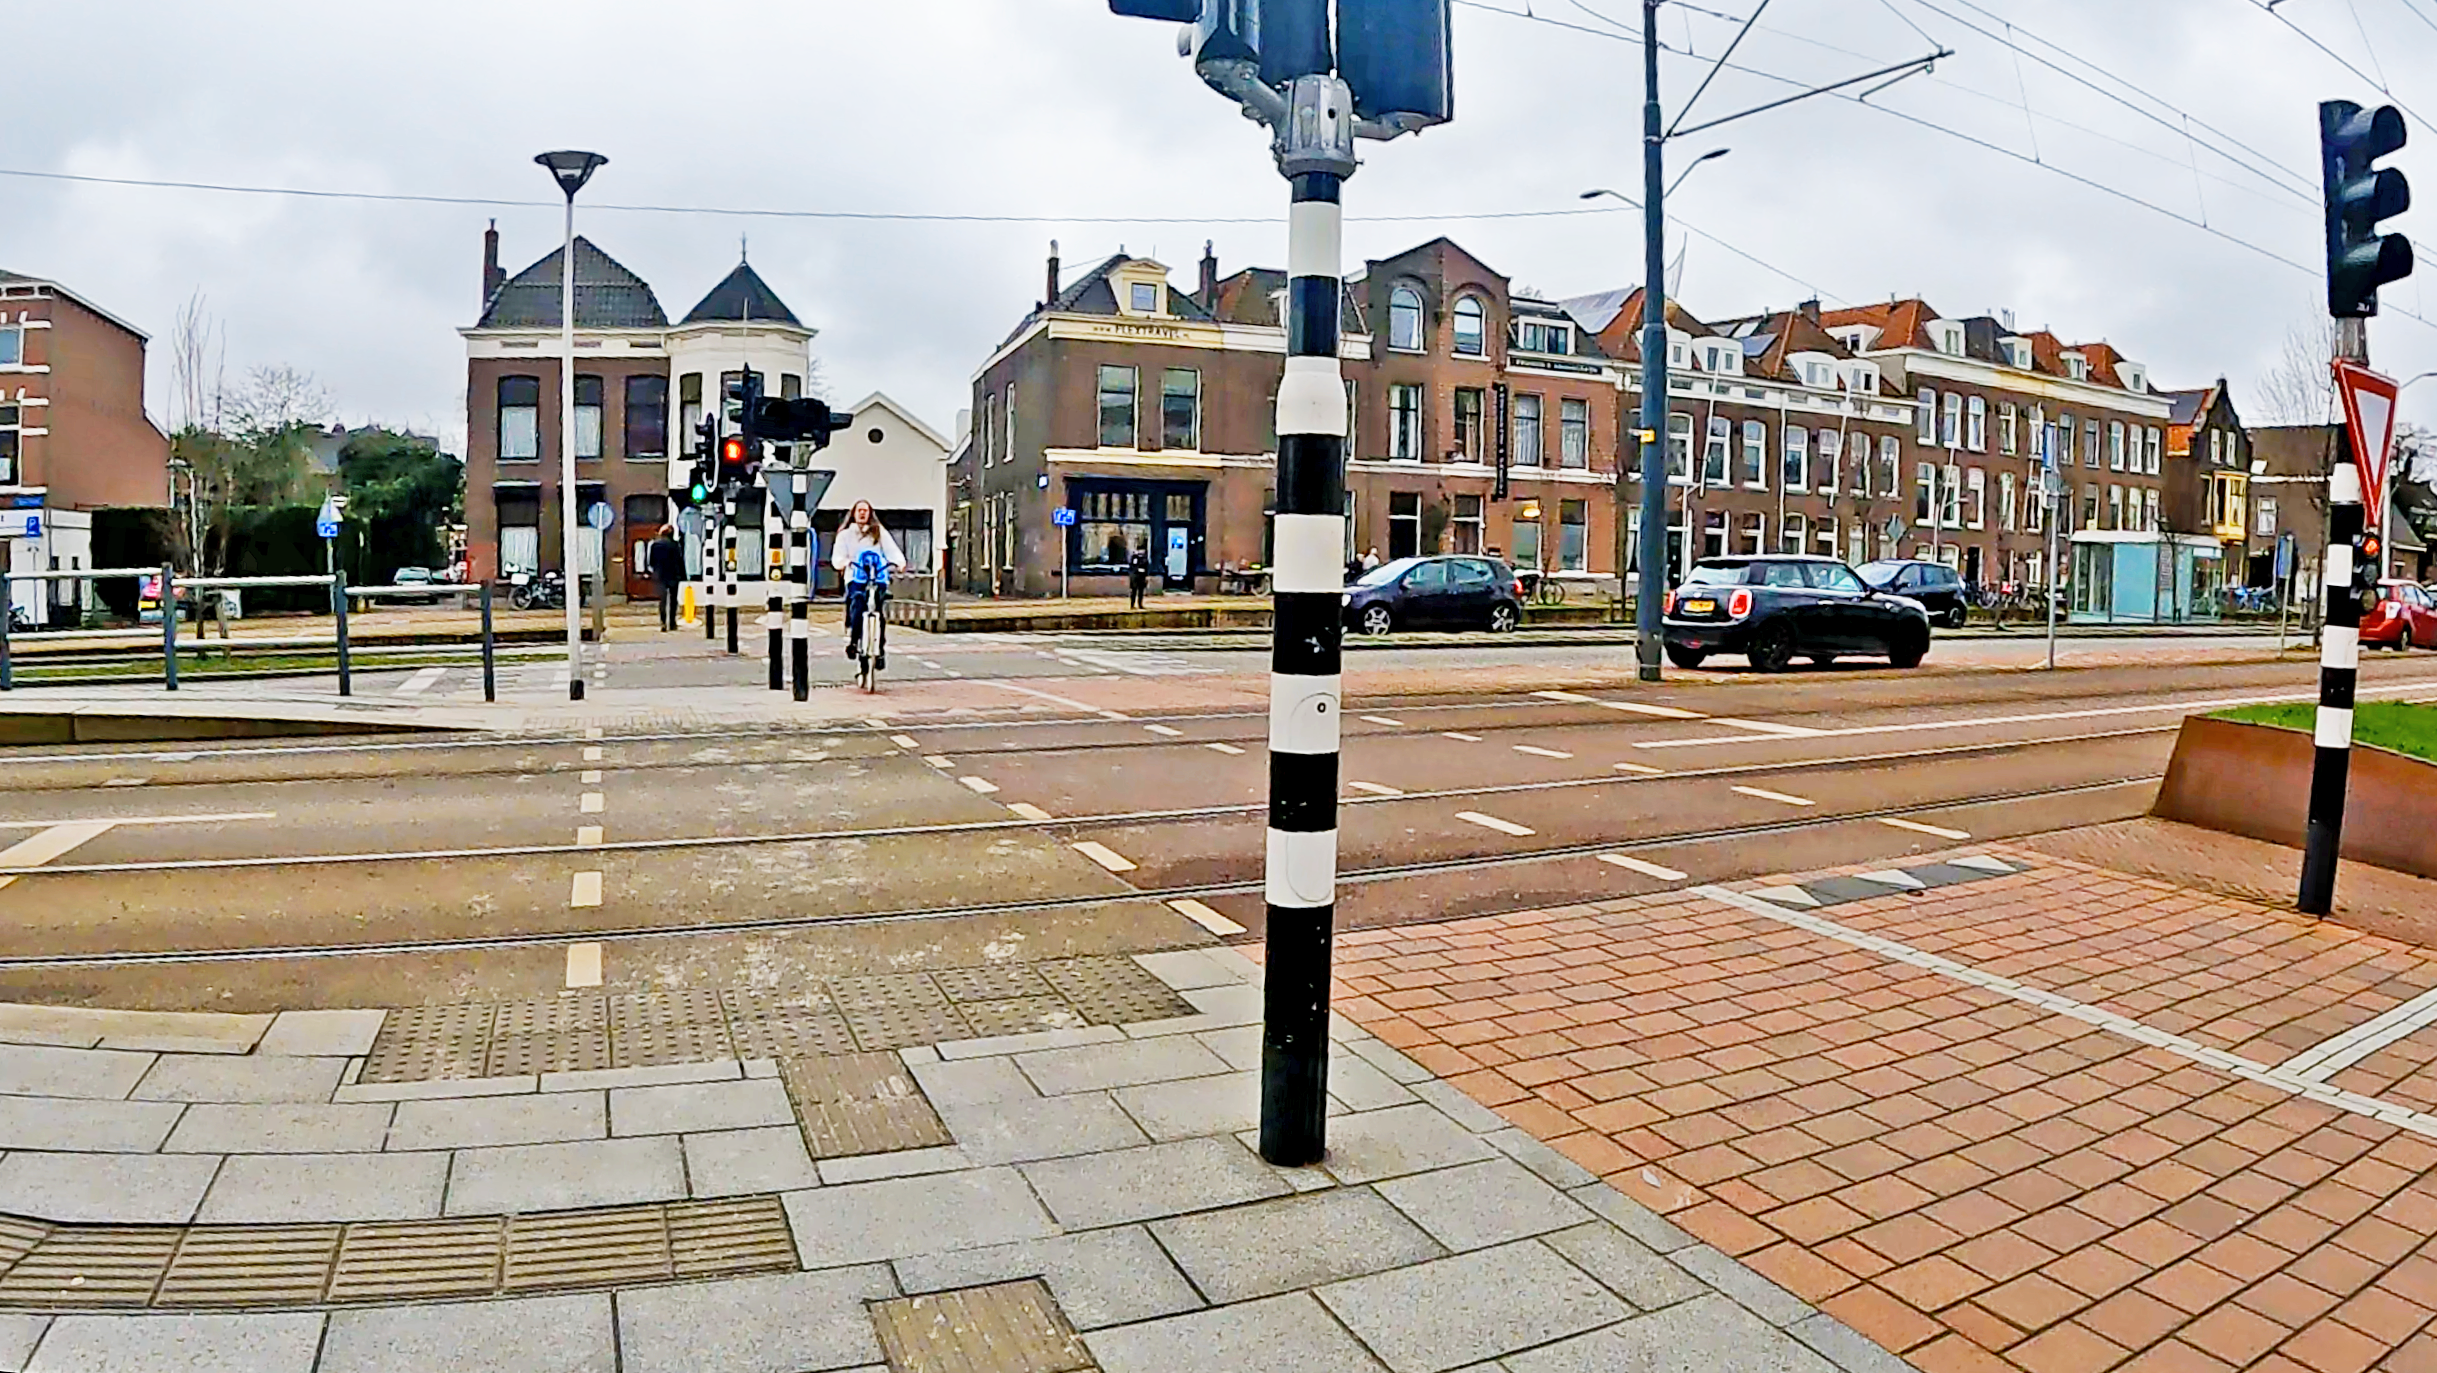 Intersection in delft